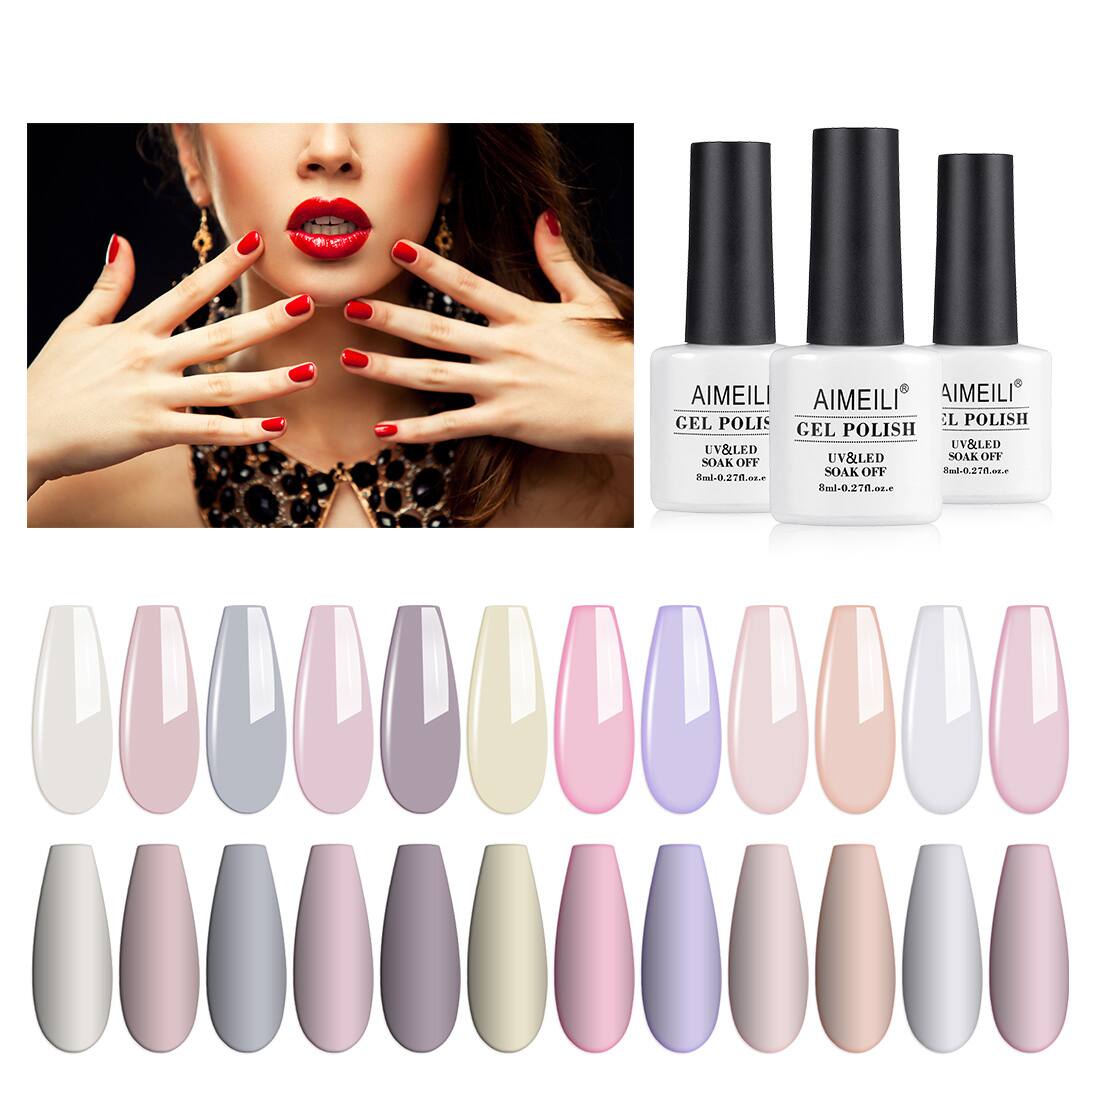 AIMEILI Clear Color Pink Nude White Gel Nail Polish Set Of 12pcs for - $7.99 + Free Shipping w/ Amazon Prime or Orders $25+